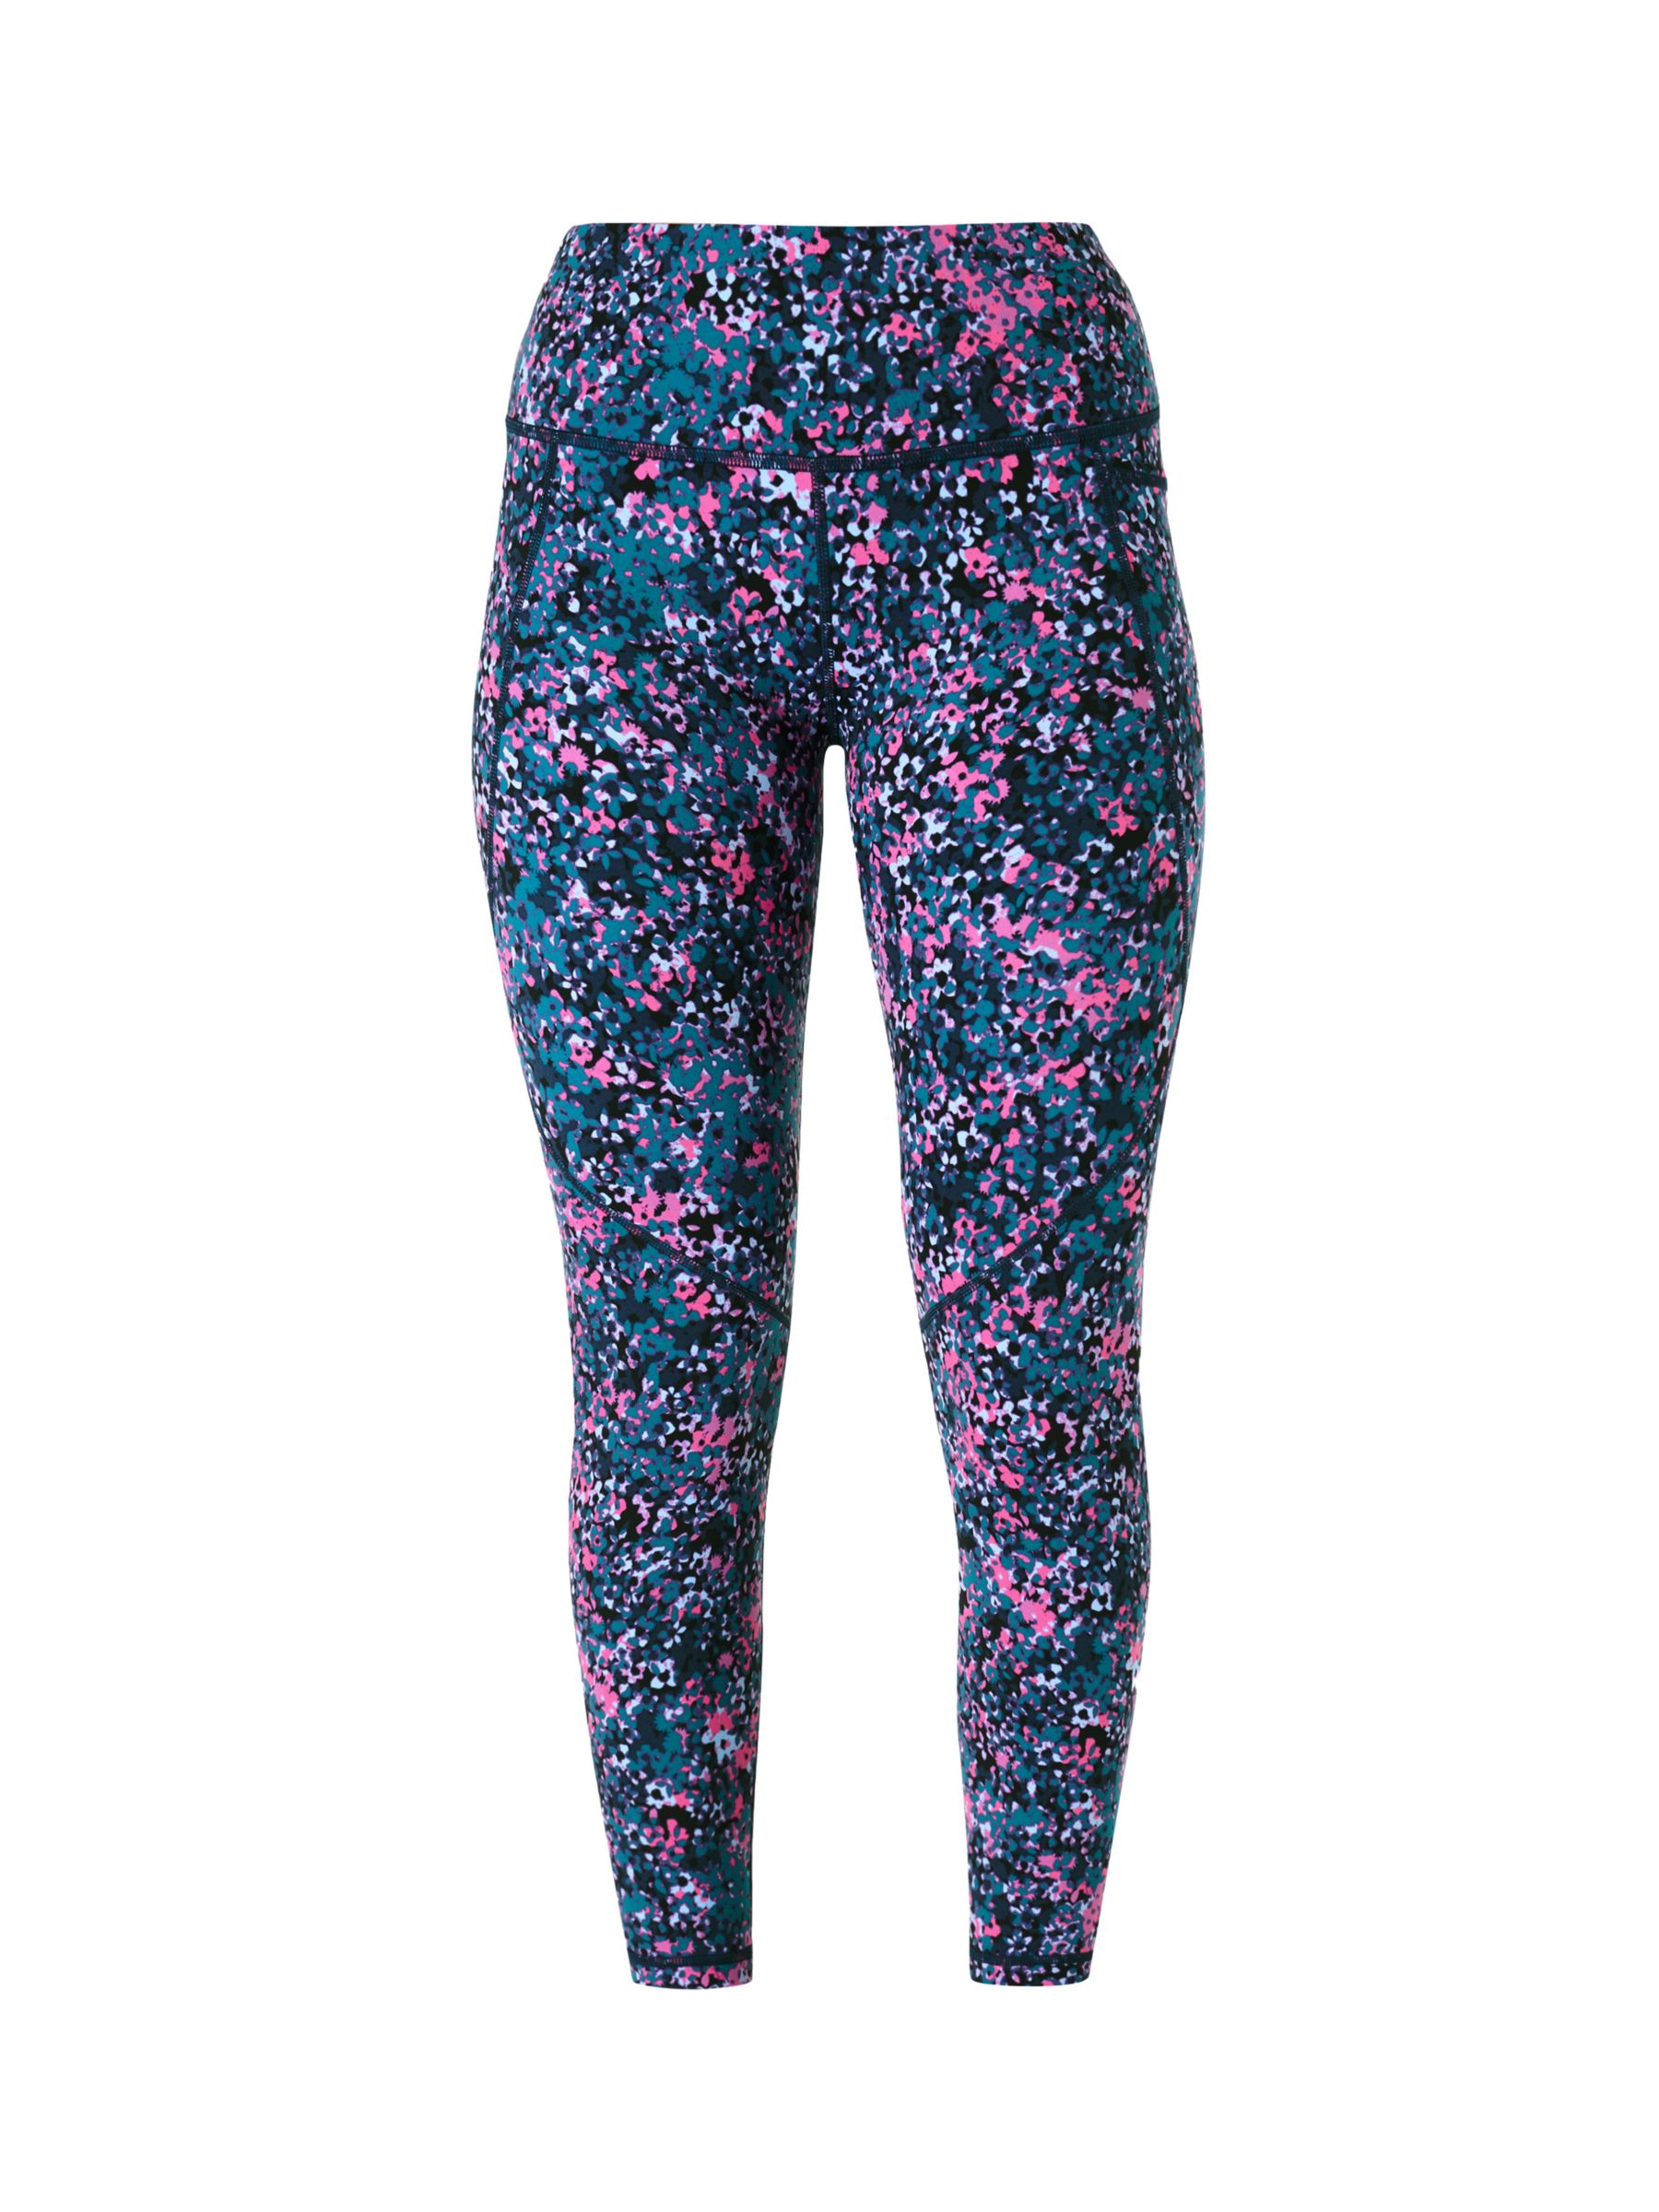 Sweaty Betty Power 7/8 Gym Leggings, Pink Scattered at John Lewis ...